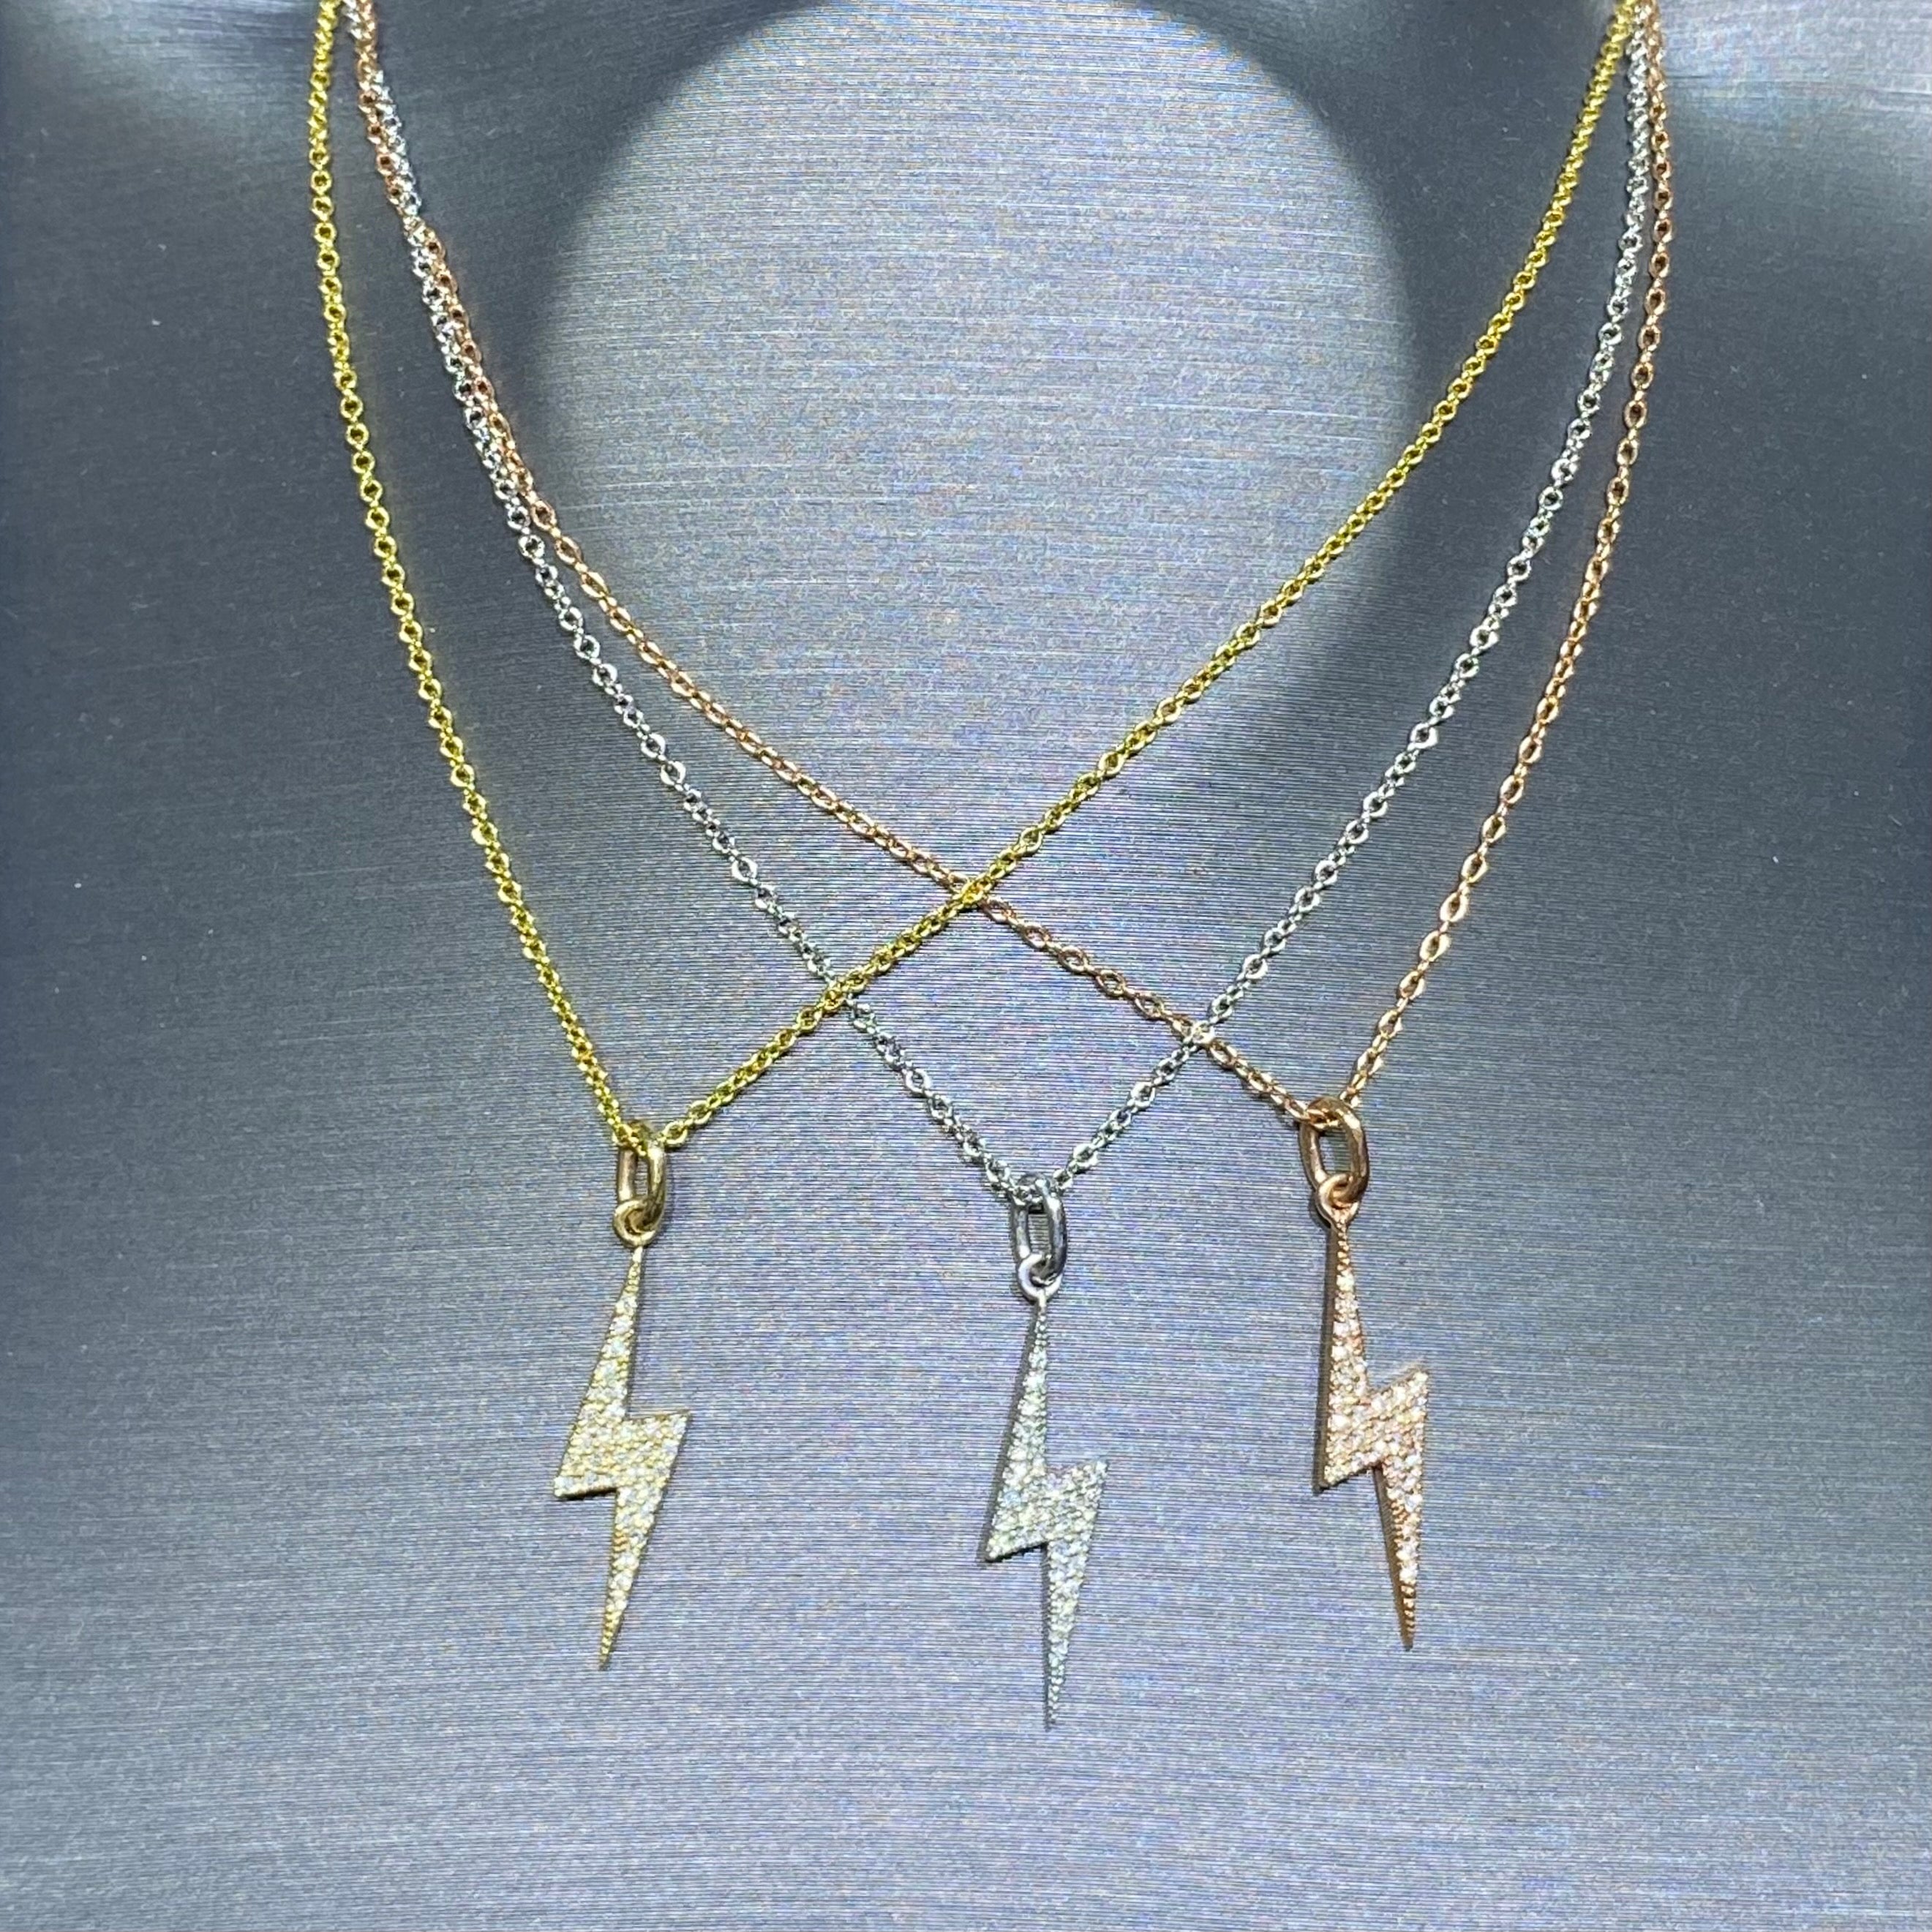 Our beautiful diamond lightening bolt pendant on an adjustable 14k 14-16  chain will be your best gift of the season!